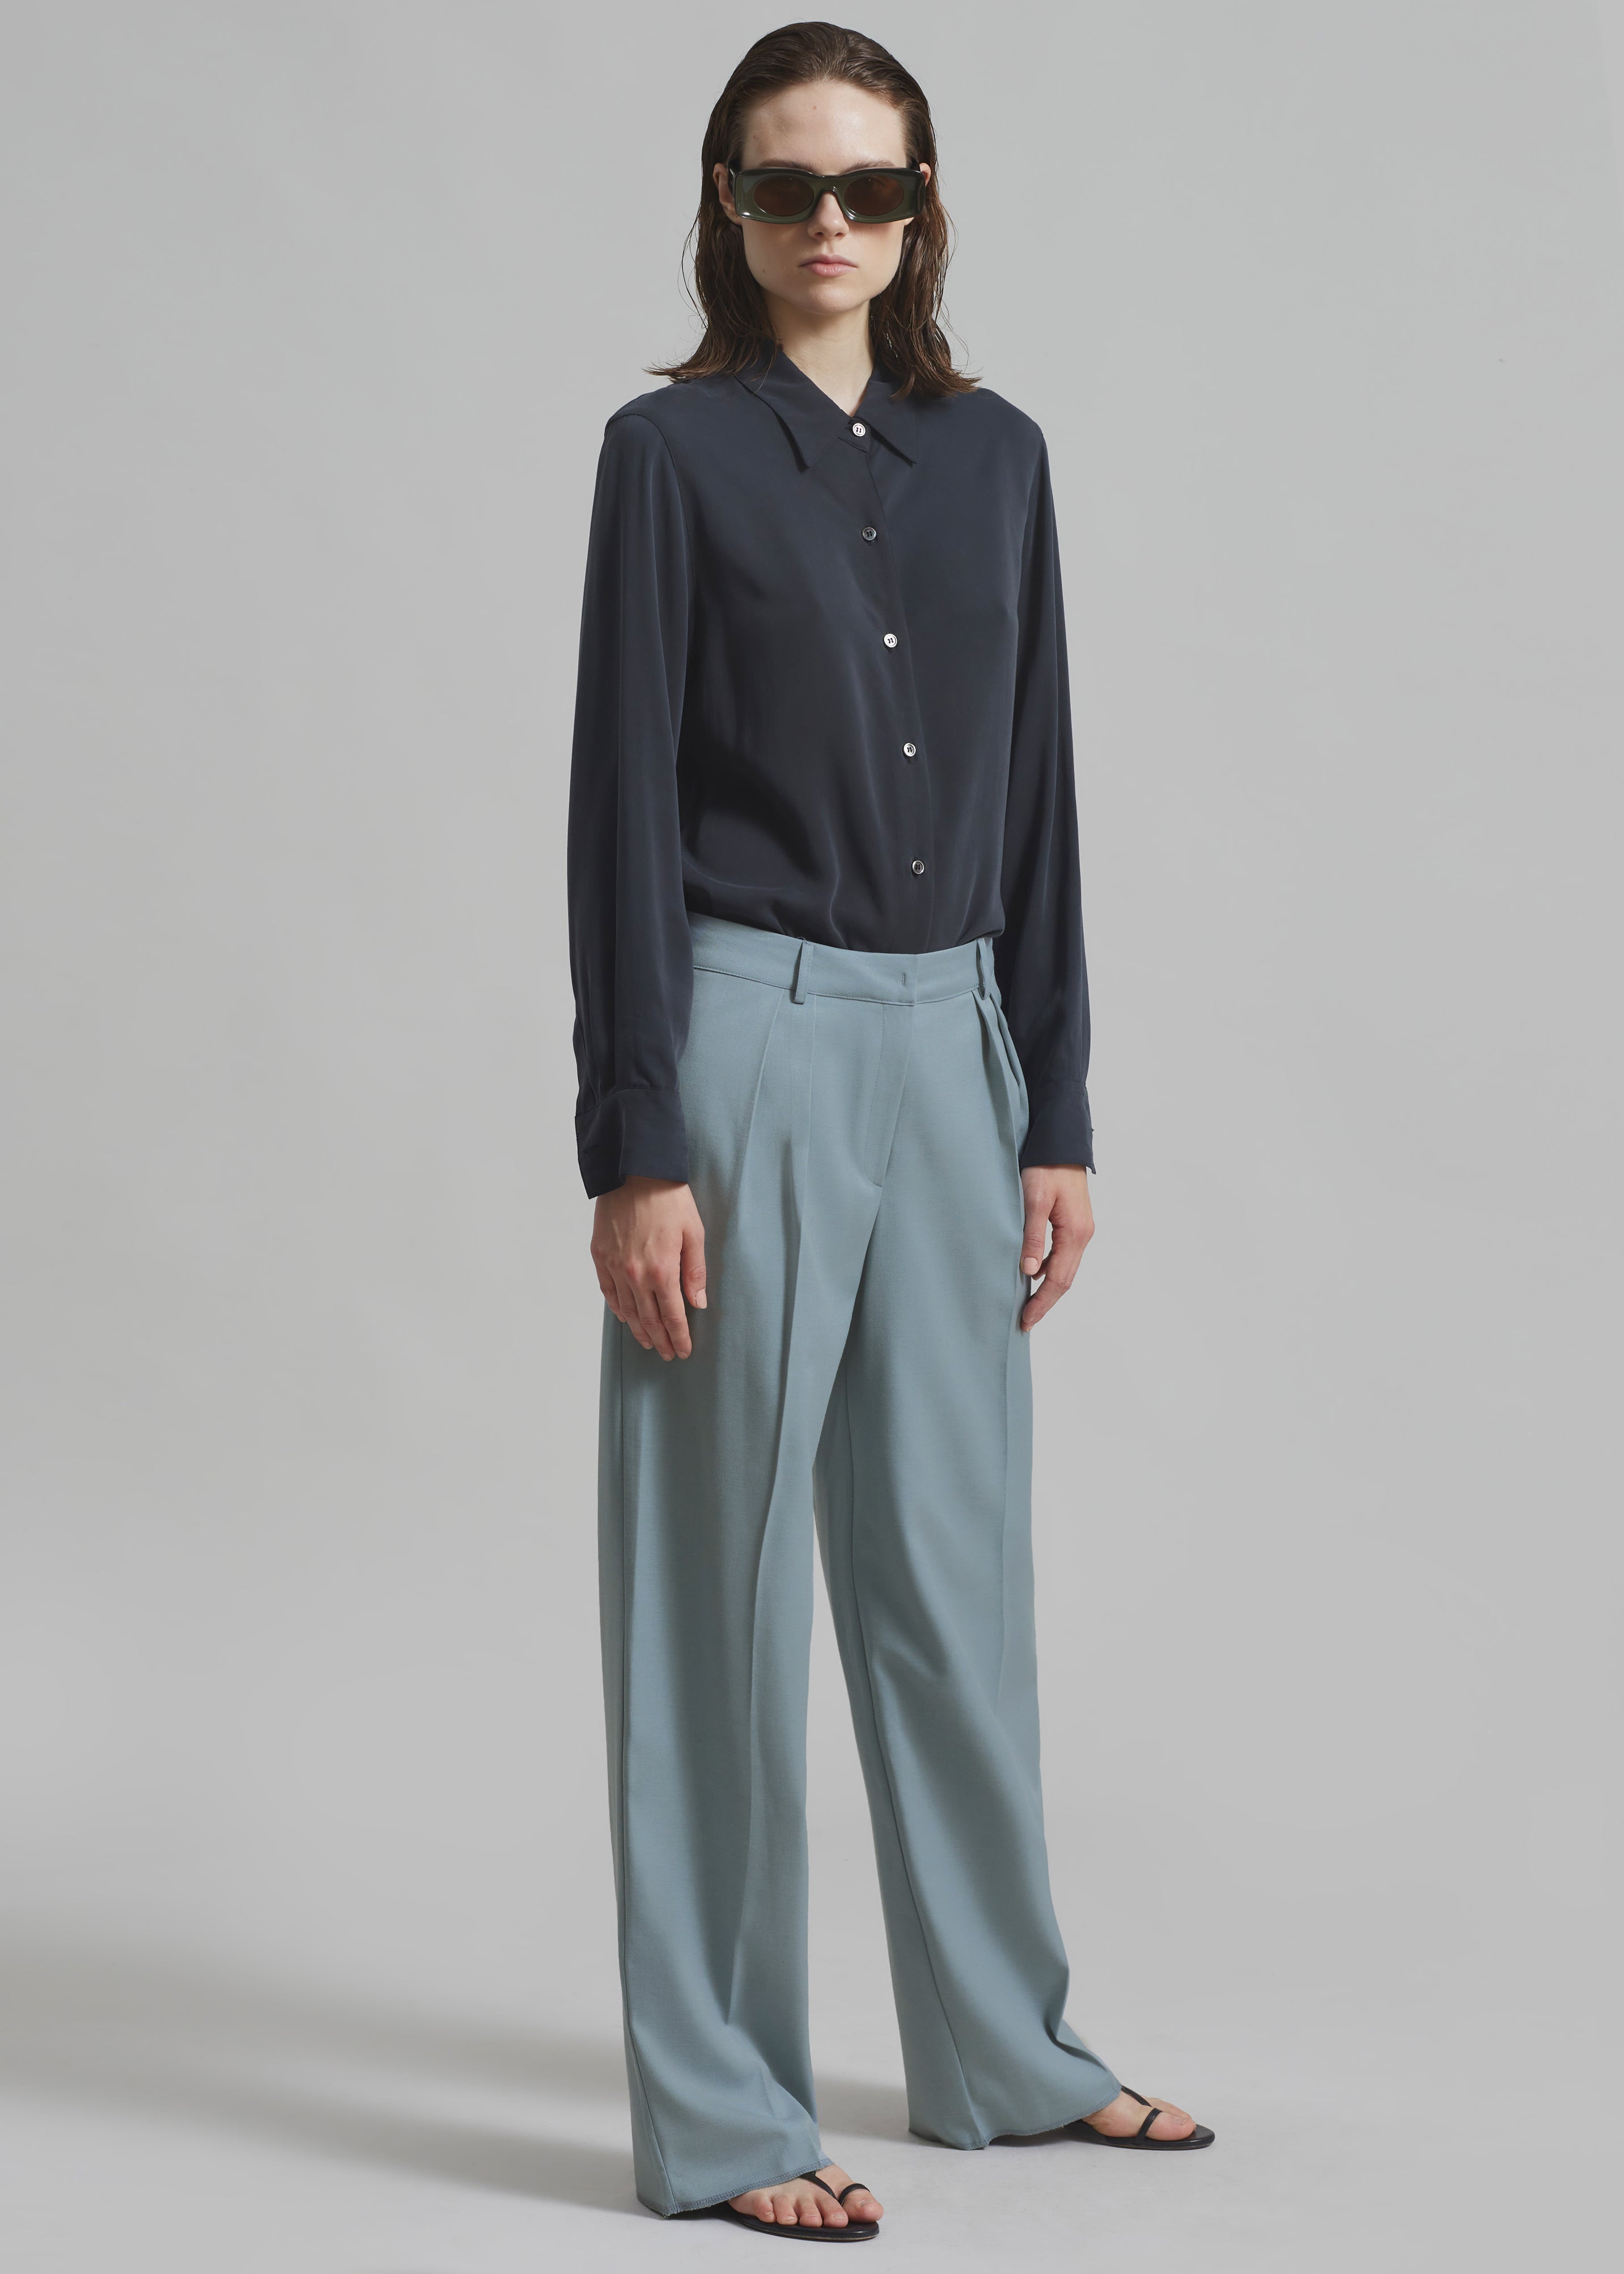 Spencer Pleated Pants - Dusty Blue - 4